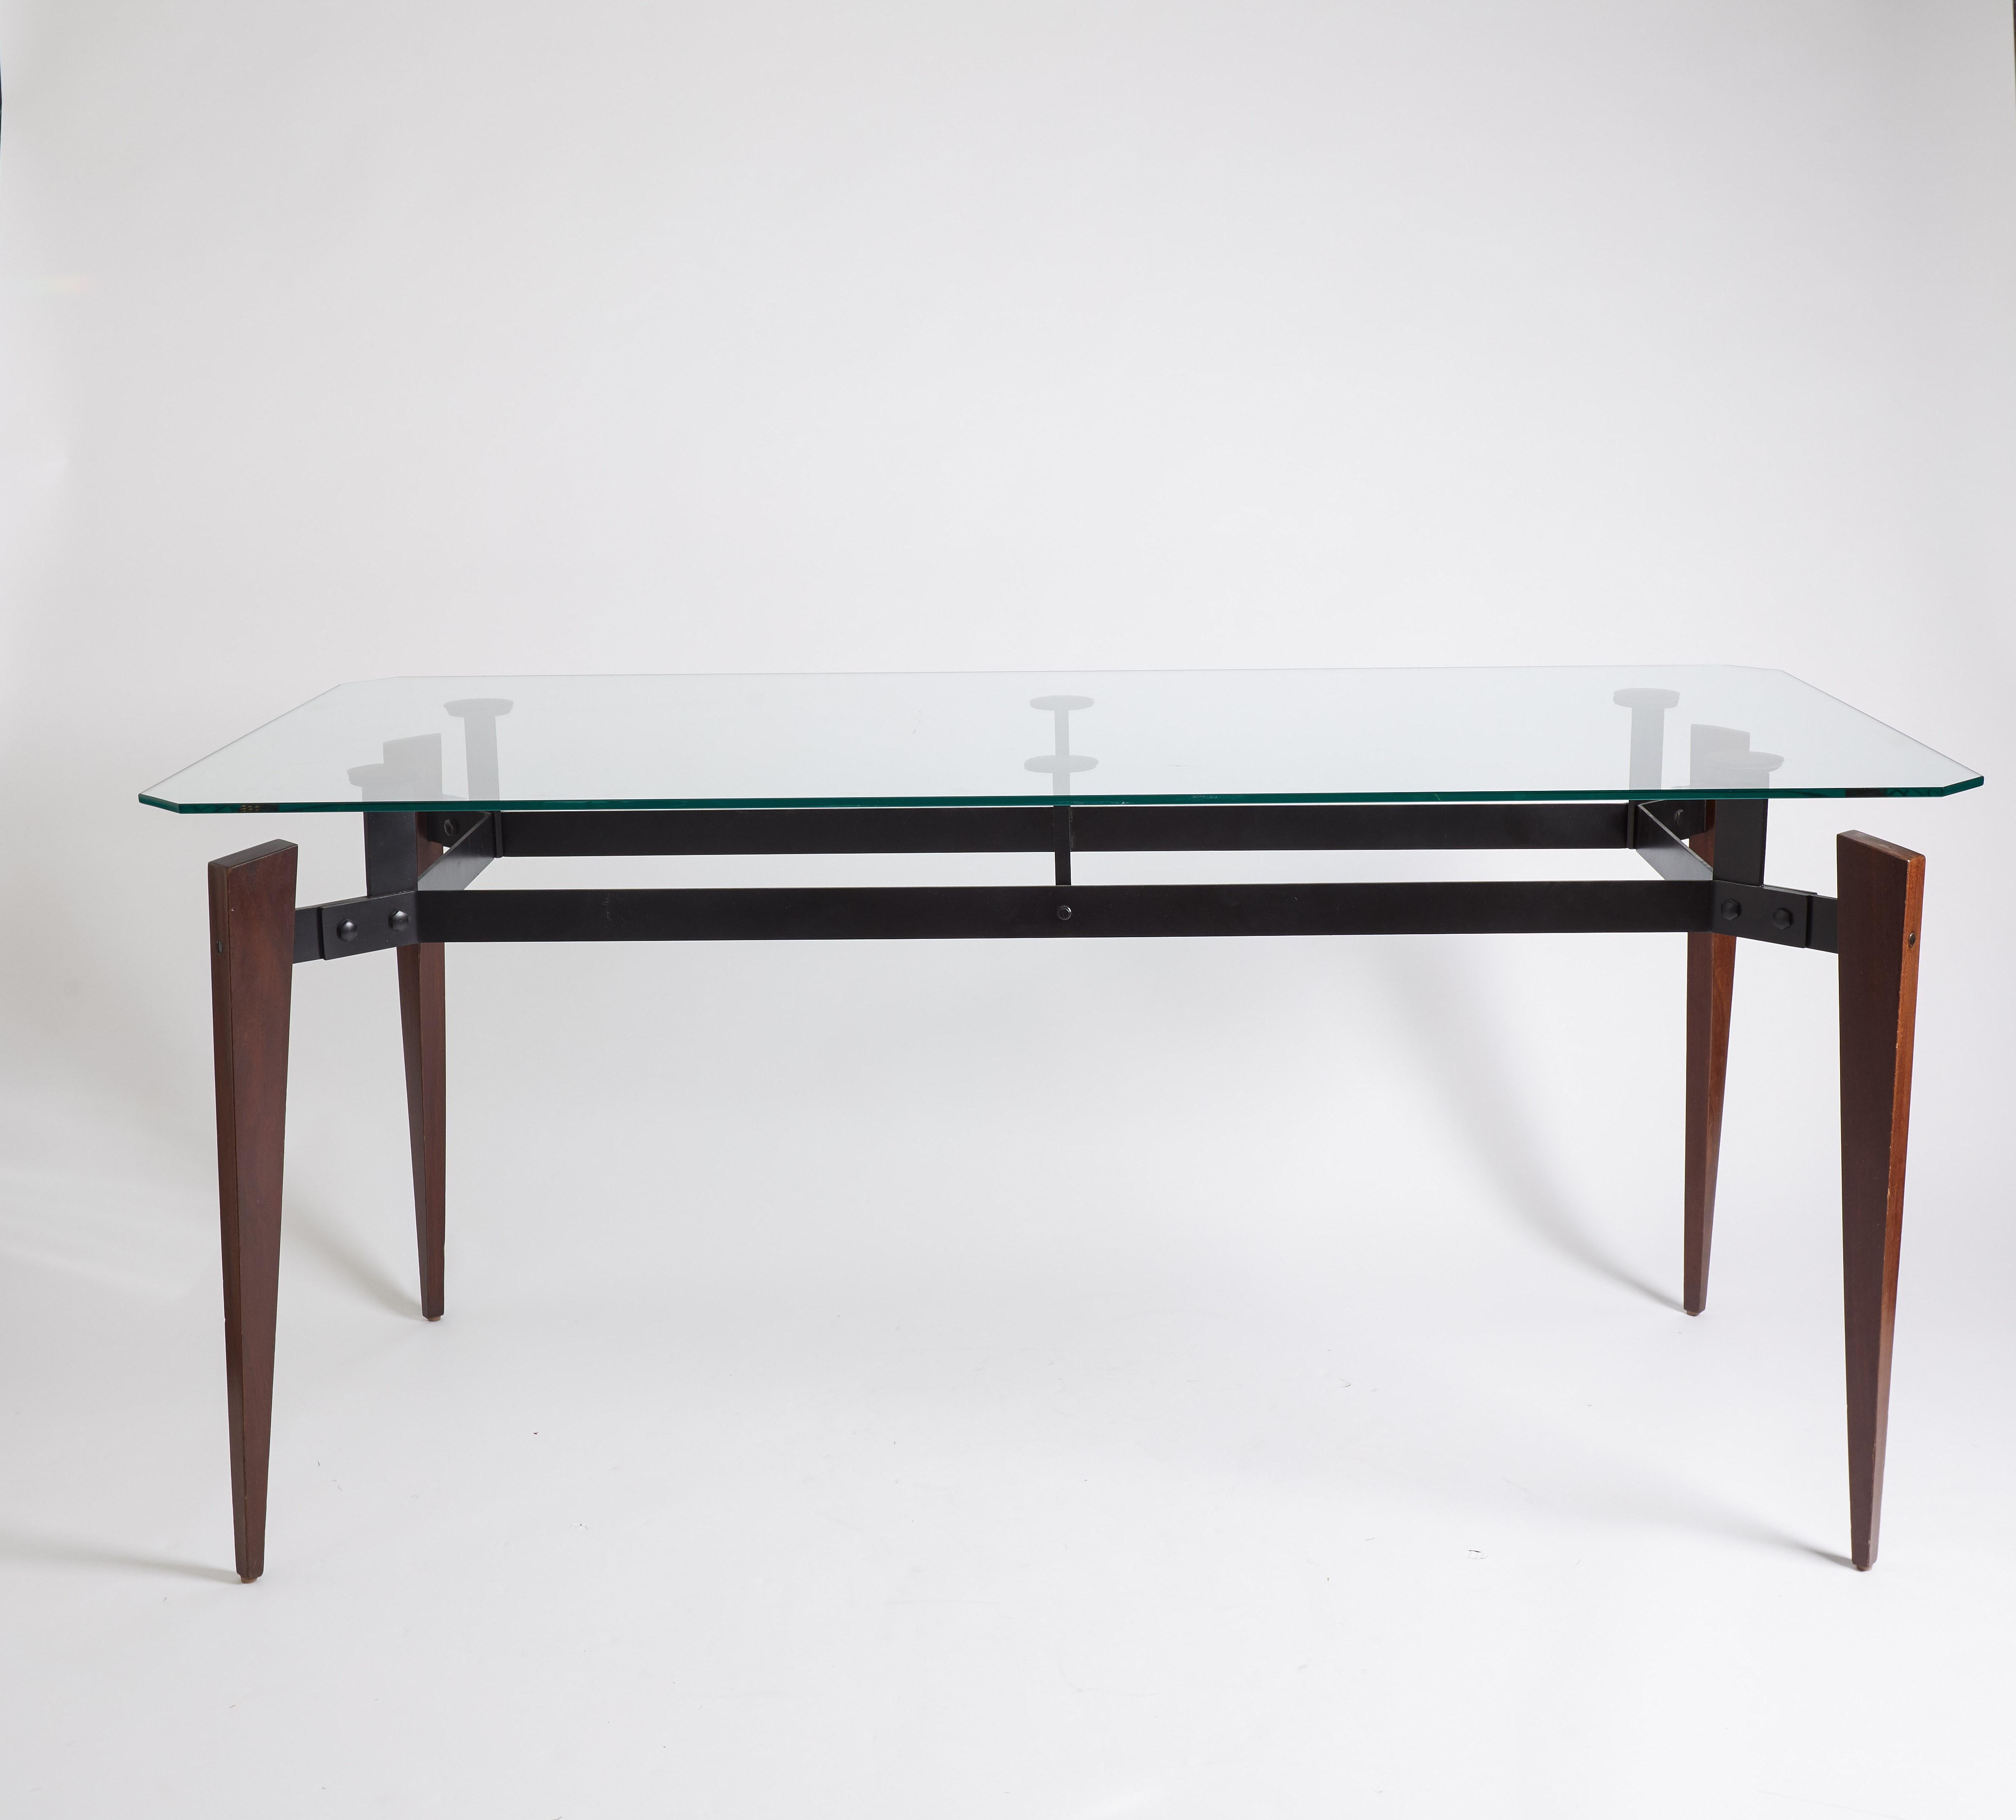 1970s French brown and black walnut wood console table with metal details and glass table top.